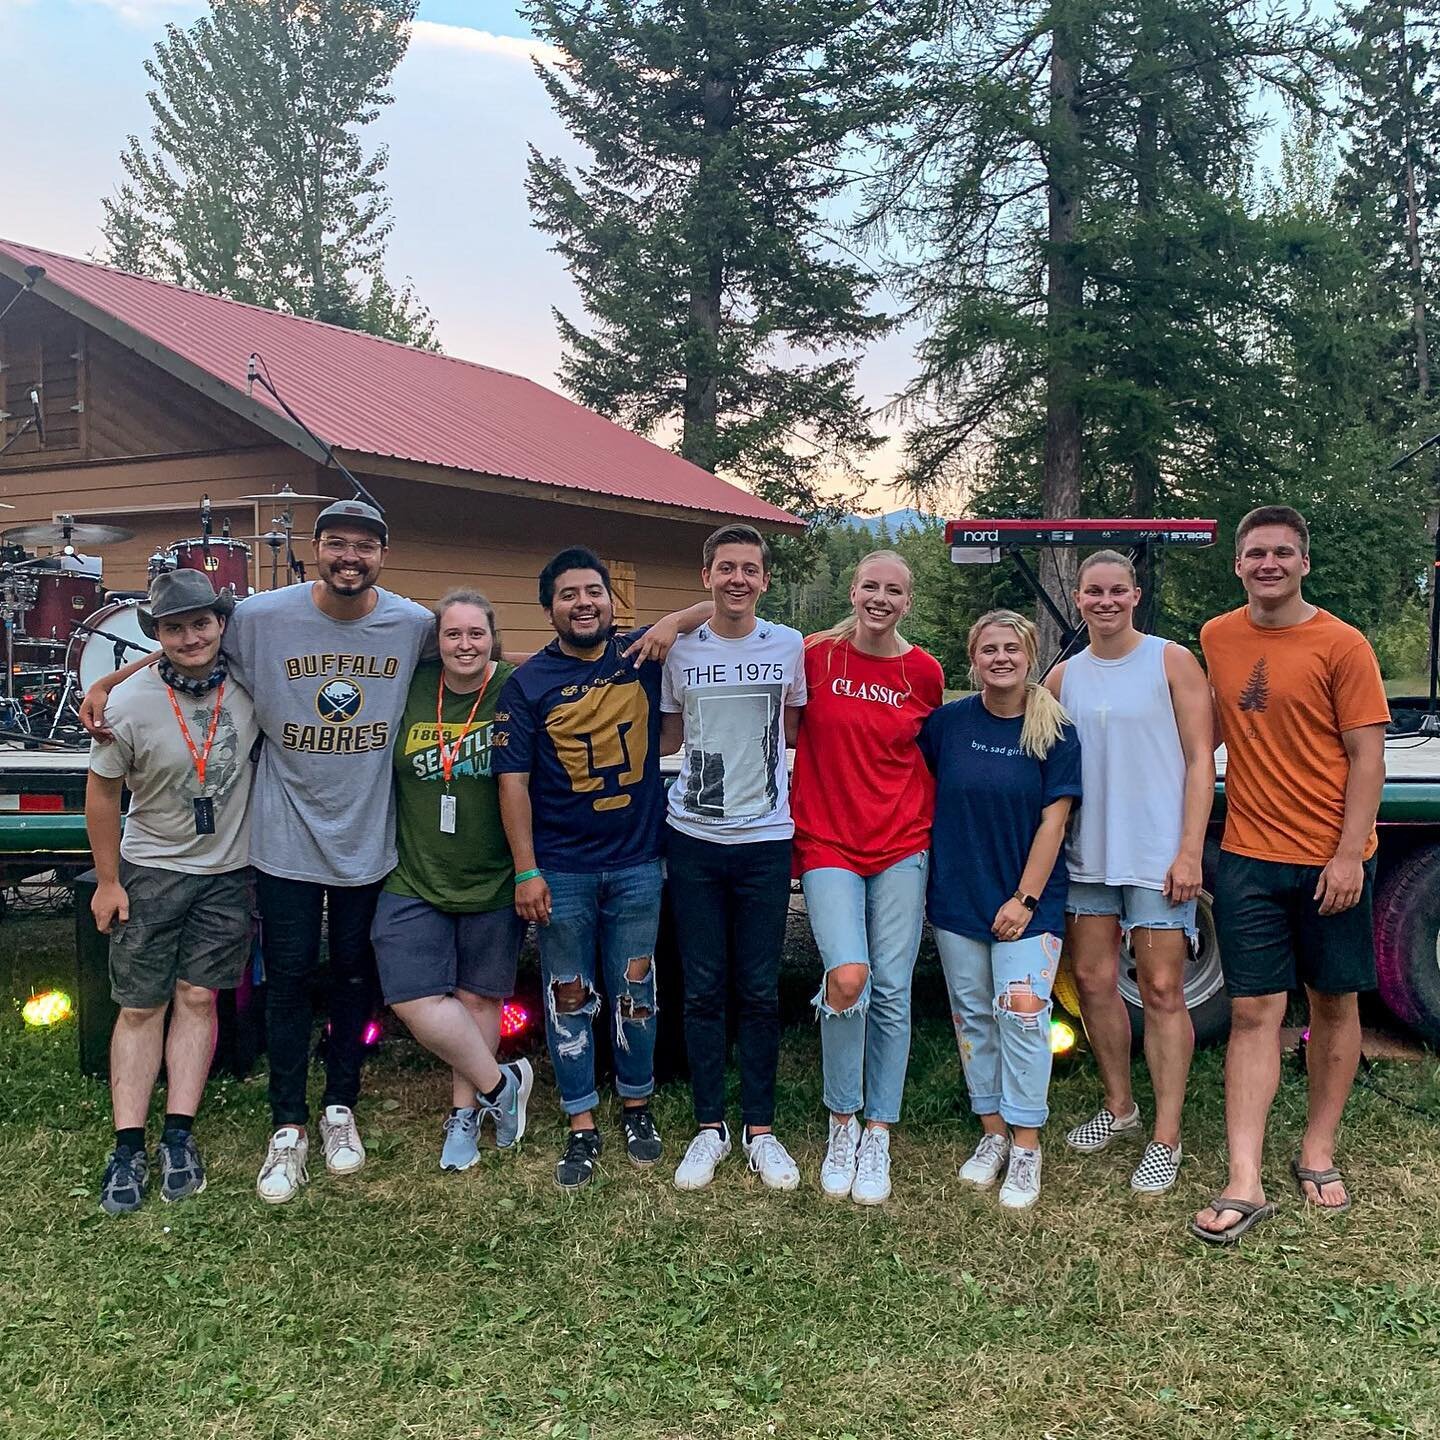 This team just wrapped up playing 3 weeks of summer camps! We are so thankful to Montana Student Ministries for blessing us so much this month. We love you, Montana students!